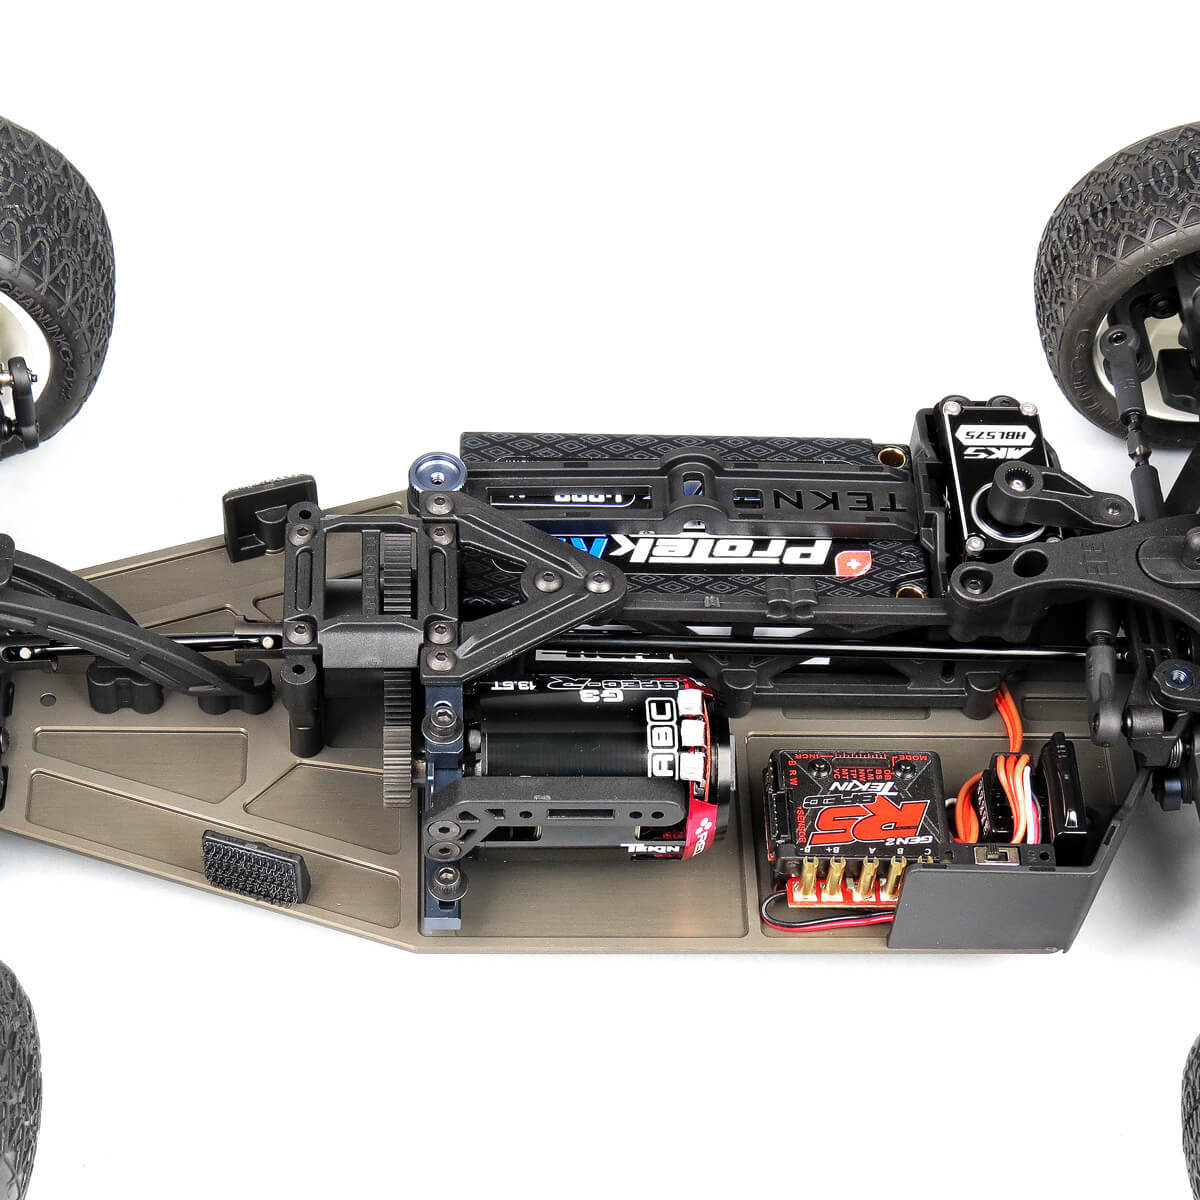 10 4WD COMPETITION ELECTRIC BUGGY KIT 